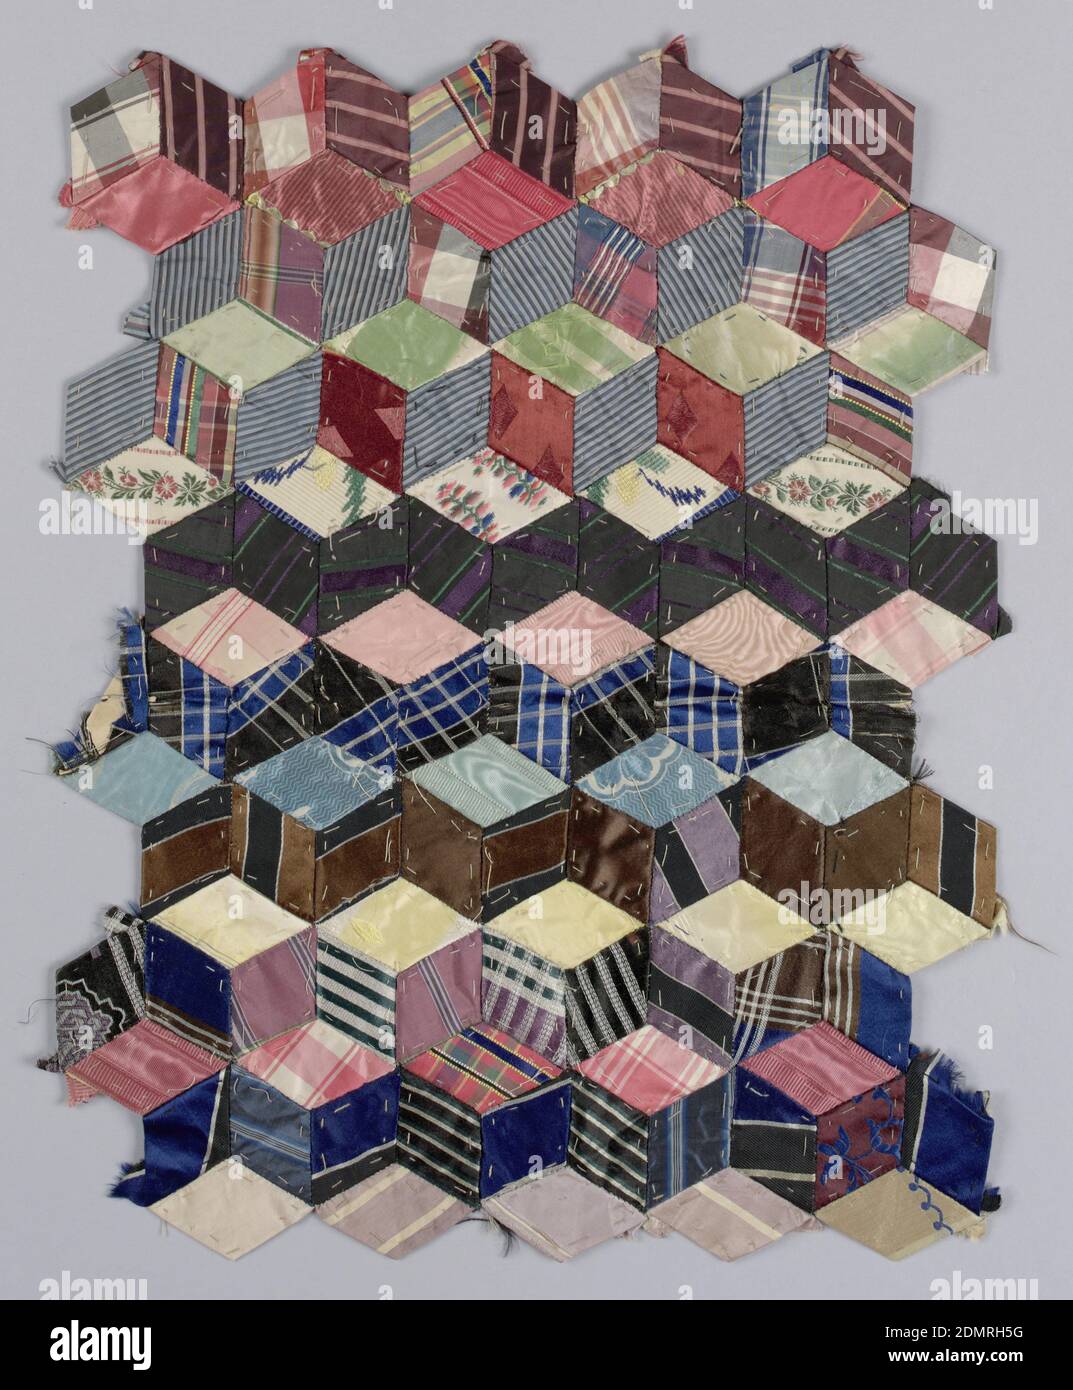 Tumbling Blocks, Medium: silk Technique: pieced and sewn patchwork of woven fabrics, Fragment of a quilt top in 'Tumbling Blocks' pattern, made from small diamond shapes stitched together to create the illusion of cubes. The woven pieces are in silk stripes, plaids and a few small floral patterns., New York, New York, USA, 1870–79, embroidery & stitching, Patchwork fragment, Patchwork fragment Stock Photo